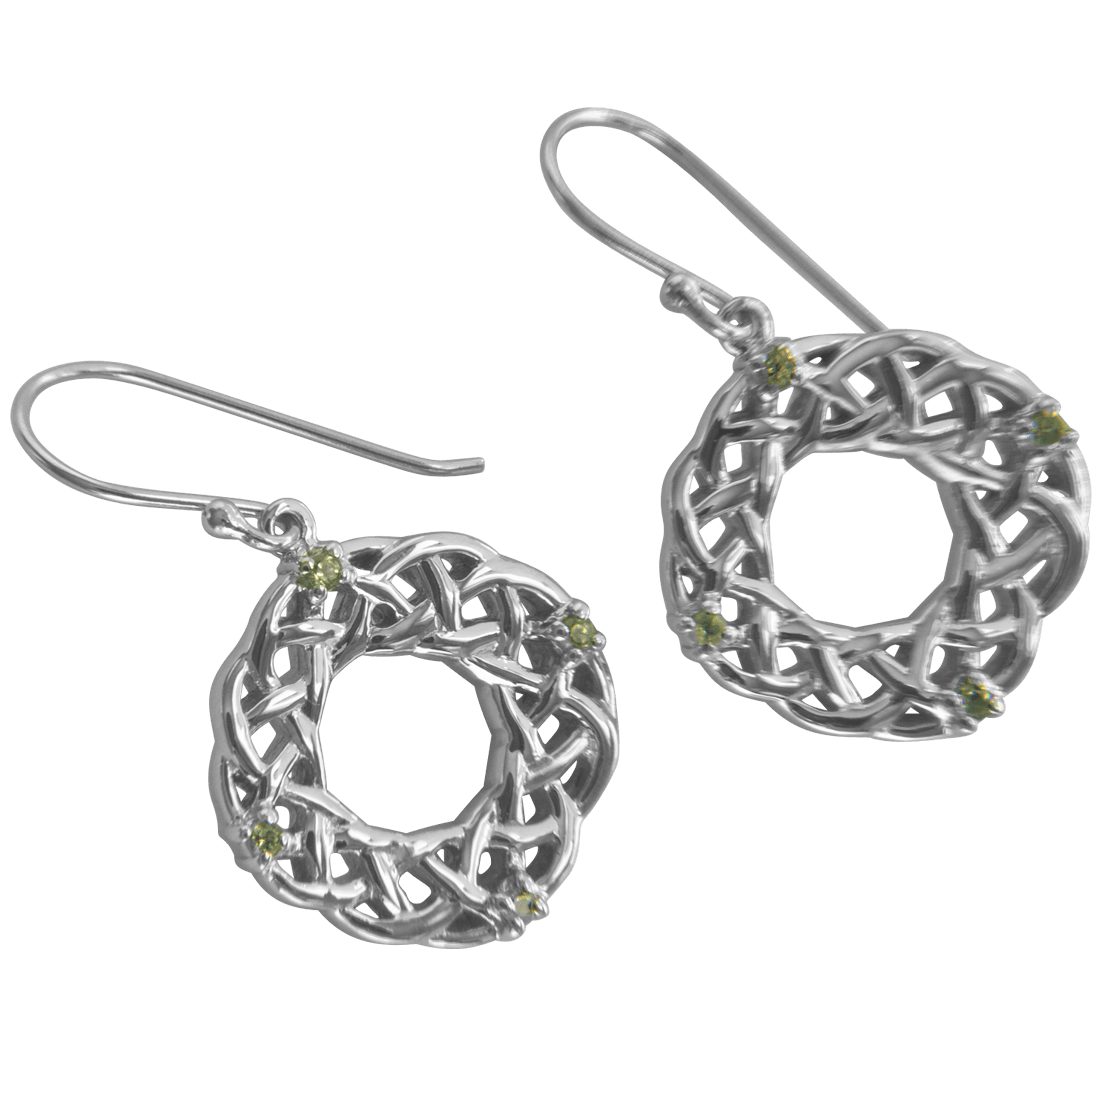 Sterling Silver Round Celtic Knotwork Earrings With Peridot - 3202